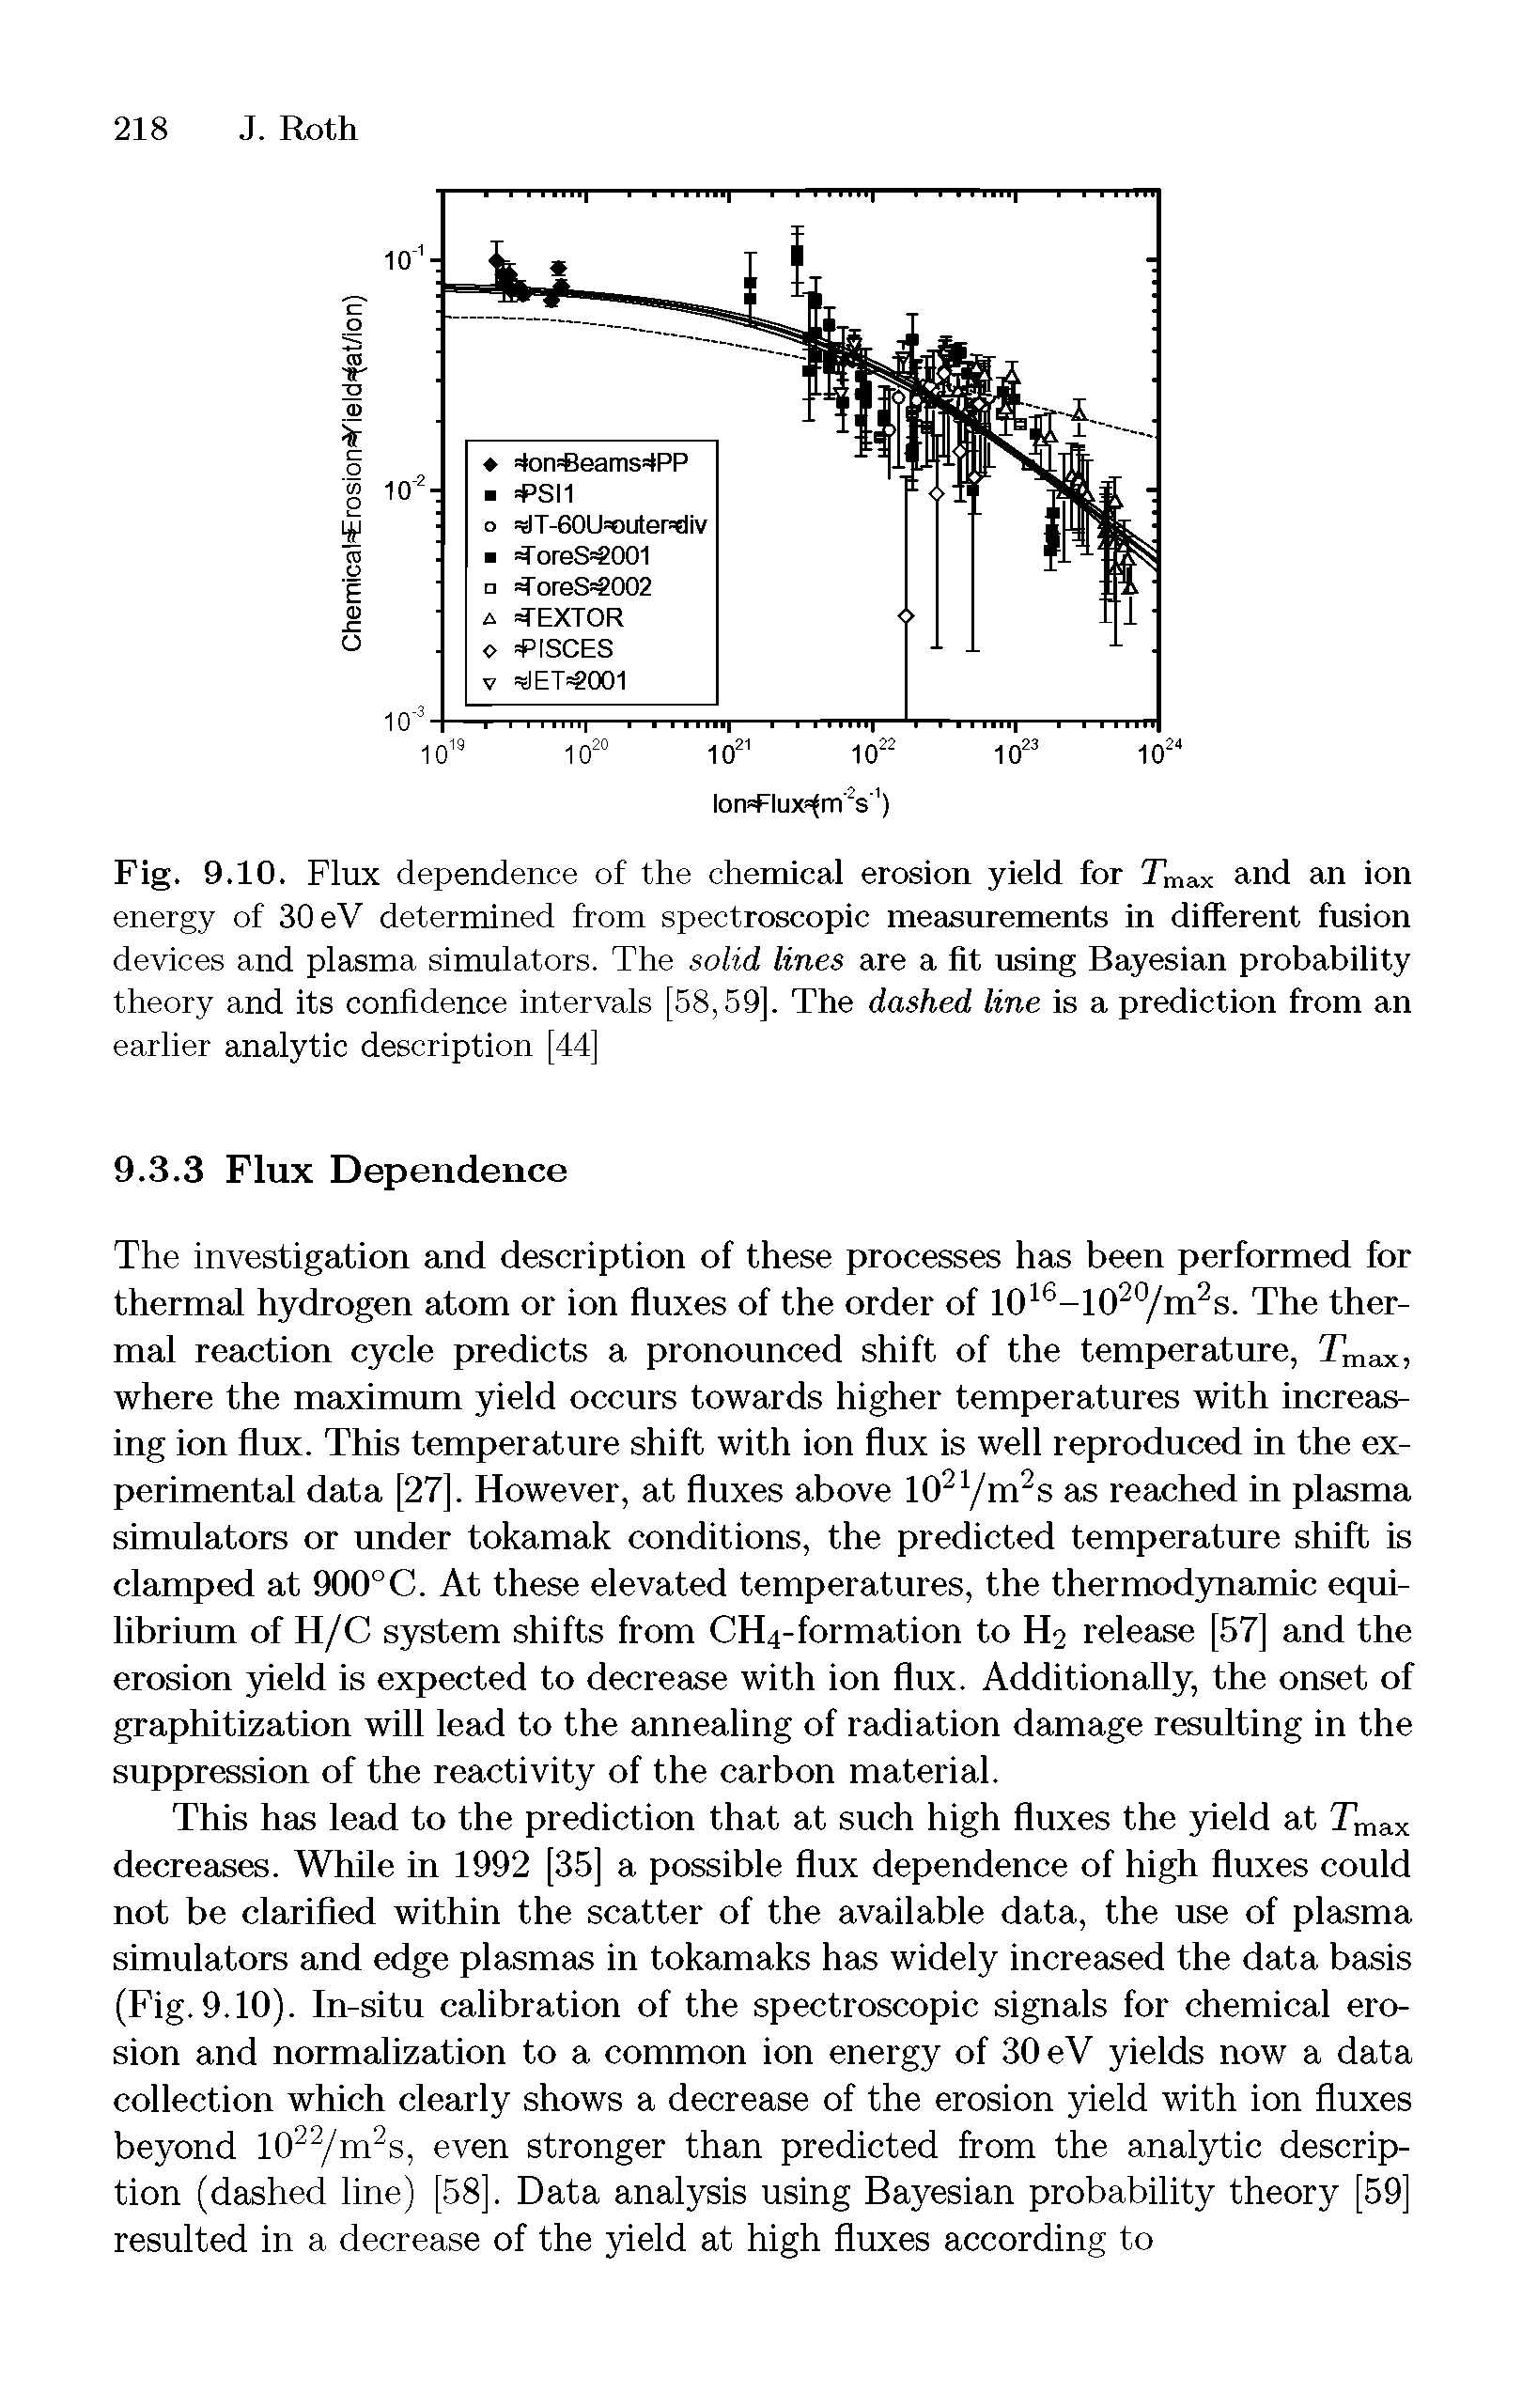 Fig. 9.10. Flux dependence of the chemical erosion yield for Tmax and an ion energy of 30 eV determined from spectroscopic measurements in different fusion devices and plasma simulators. The solid lines are a fit using Bayesian probability theory and its confidence intervals [58,59]. The dashed line is a prediction from an earlier analytic description [44]...